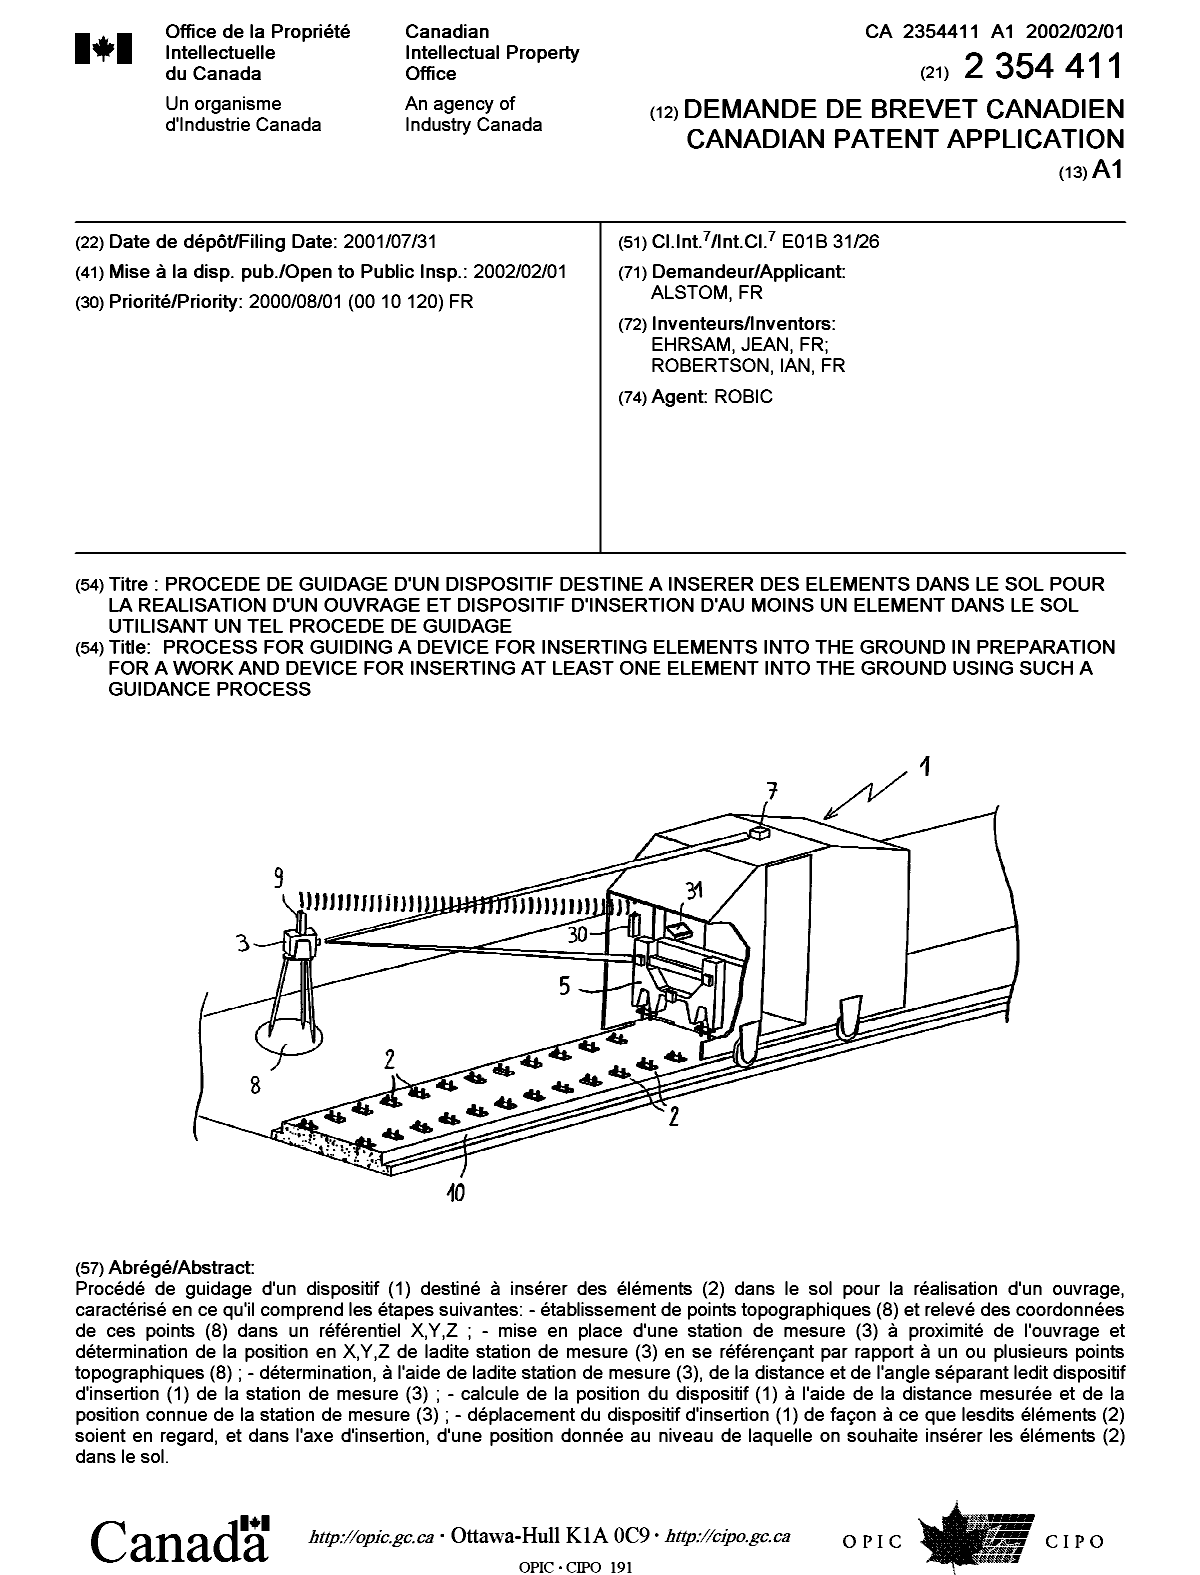 Canadian Patent Document 2354411. Cover Page 20020204. Image 1 of 1